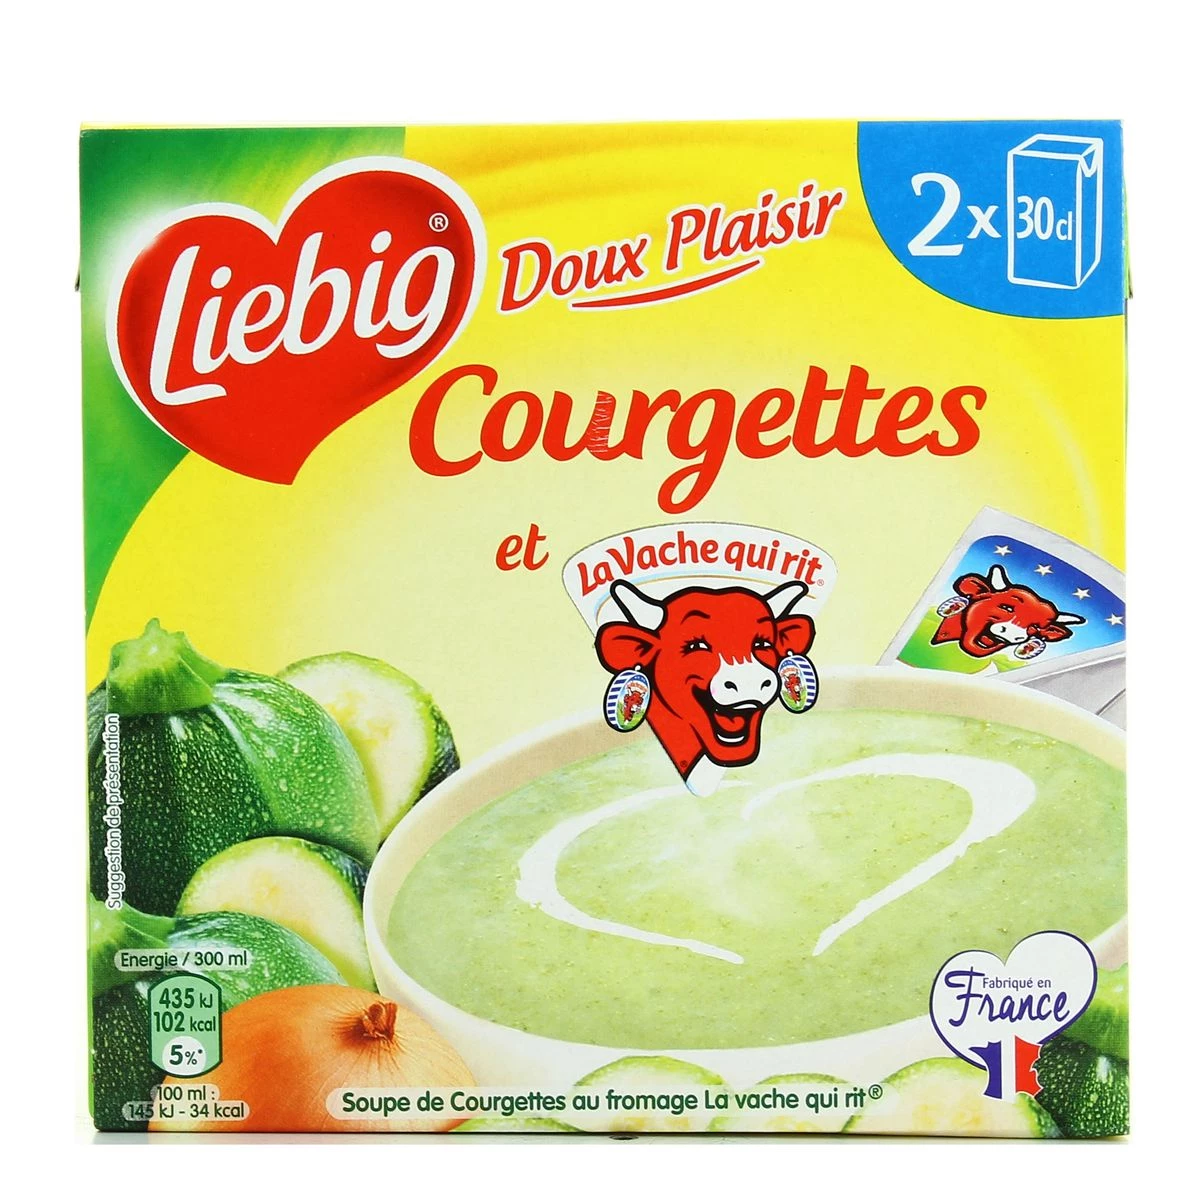 zucchini soup with laughing cow cheese 2x30cl - LIEBIG